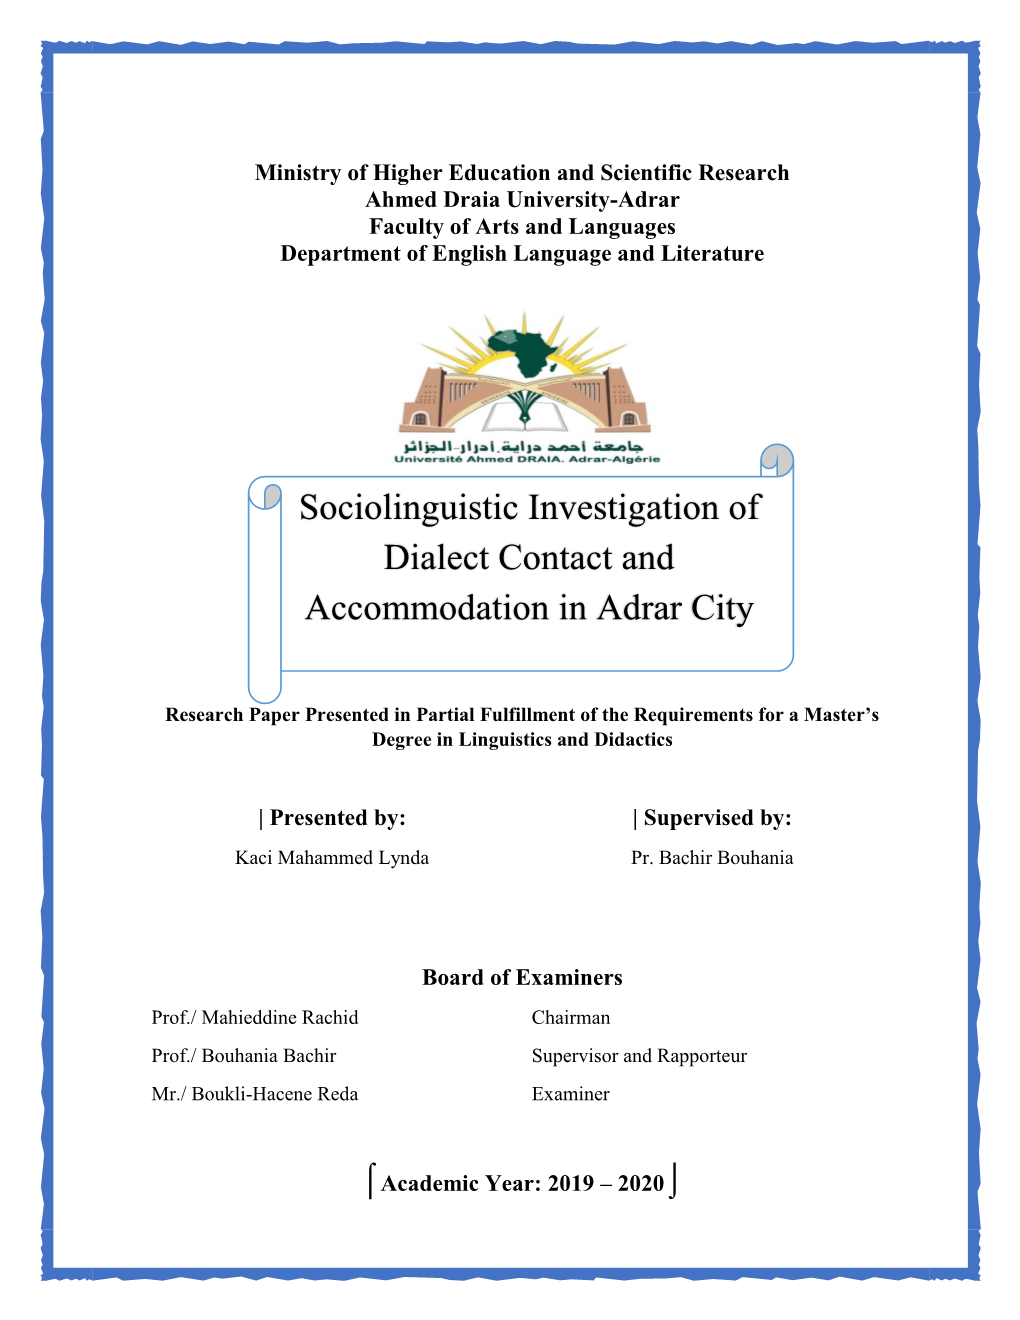 Sociolinguistic Investigation of Dialect Contact and Accommodation in Adrar City